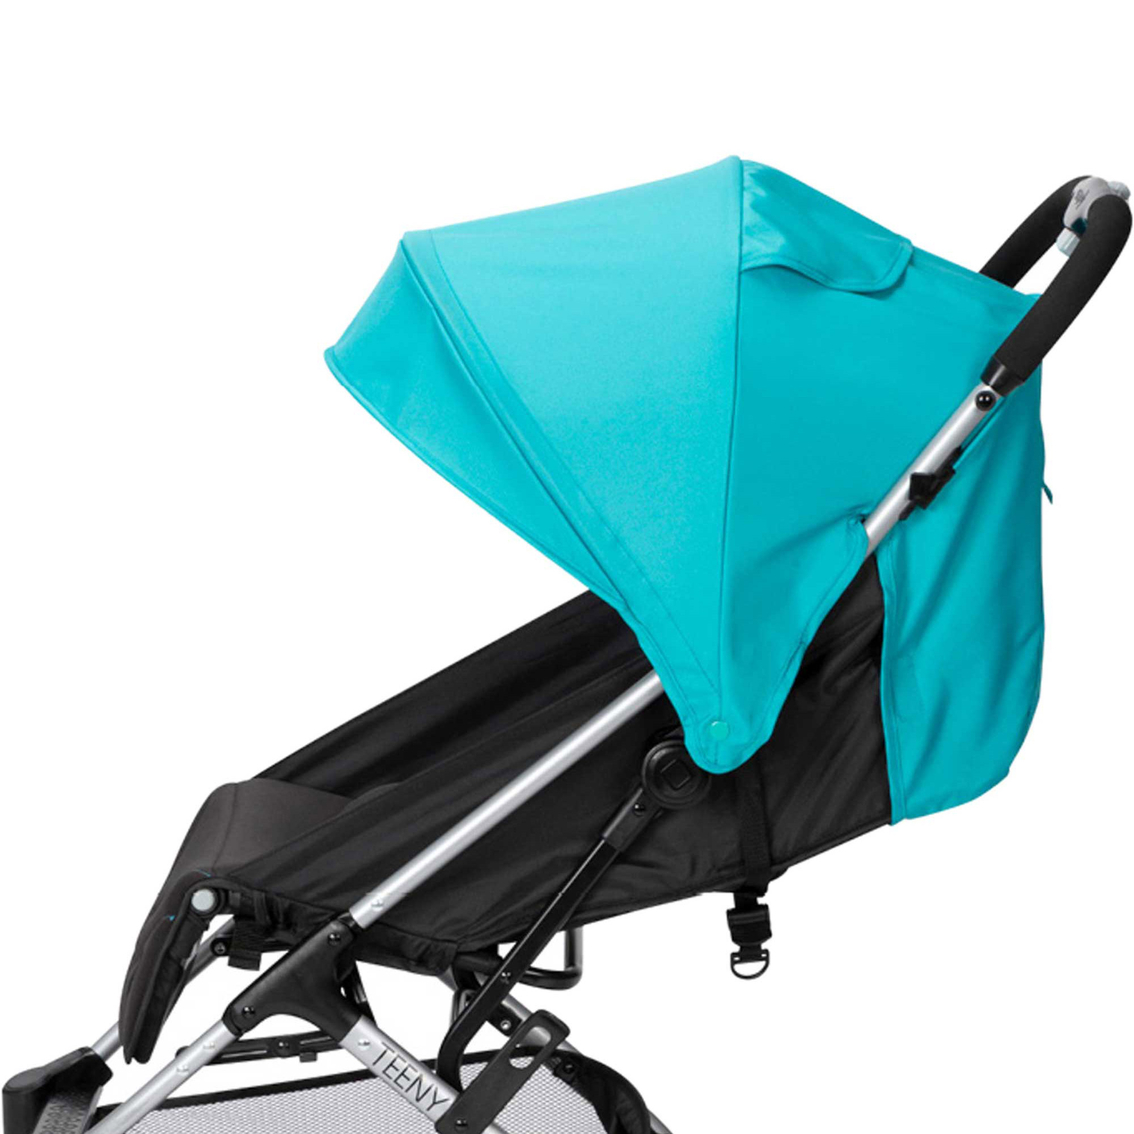 Safety 1st Teeny Ultra Compact Stroller - Image 6 of 8